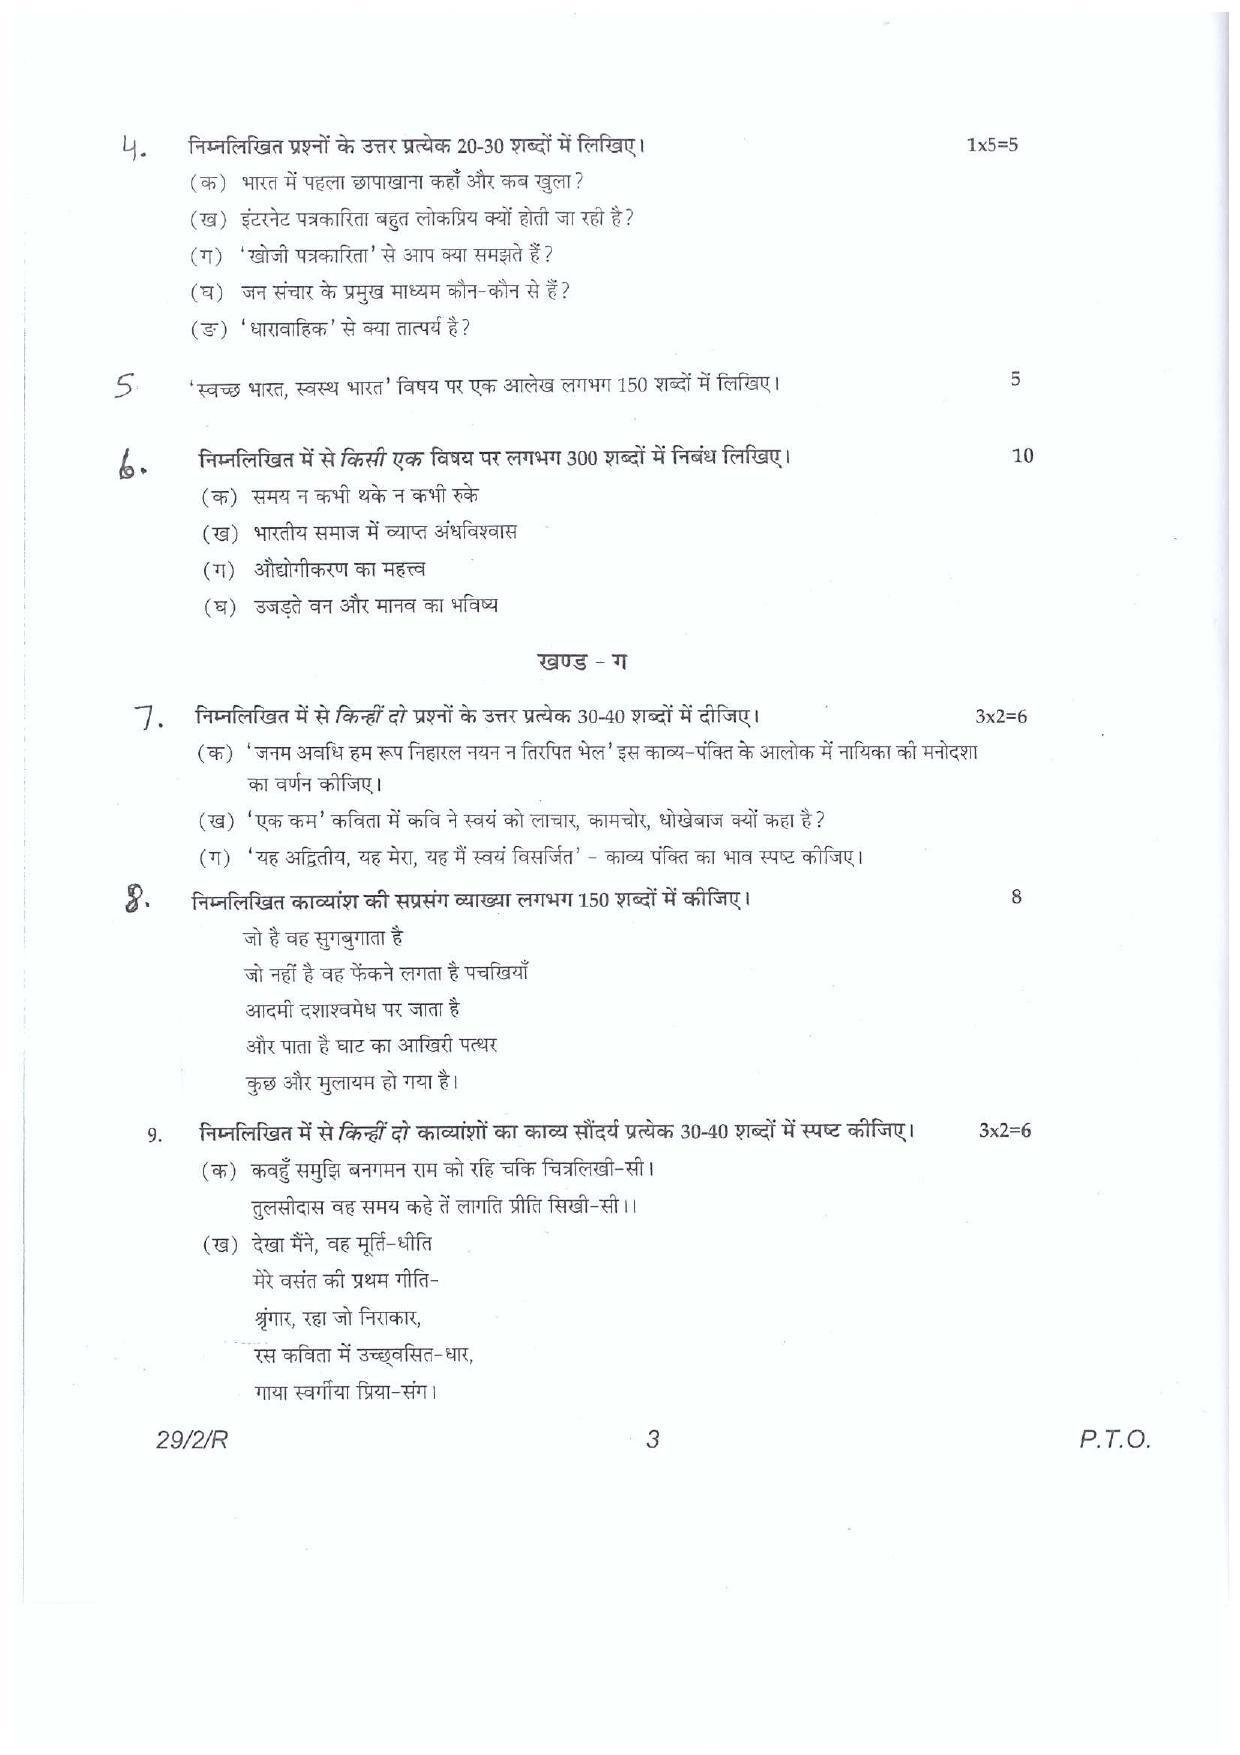 CBSE Class 12 29-2R  HINDI ELECTIVE (SGN) 2018 Question Paper - Page 3